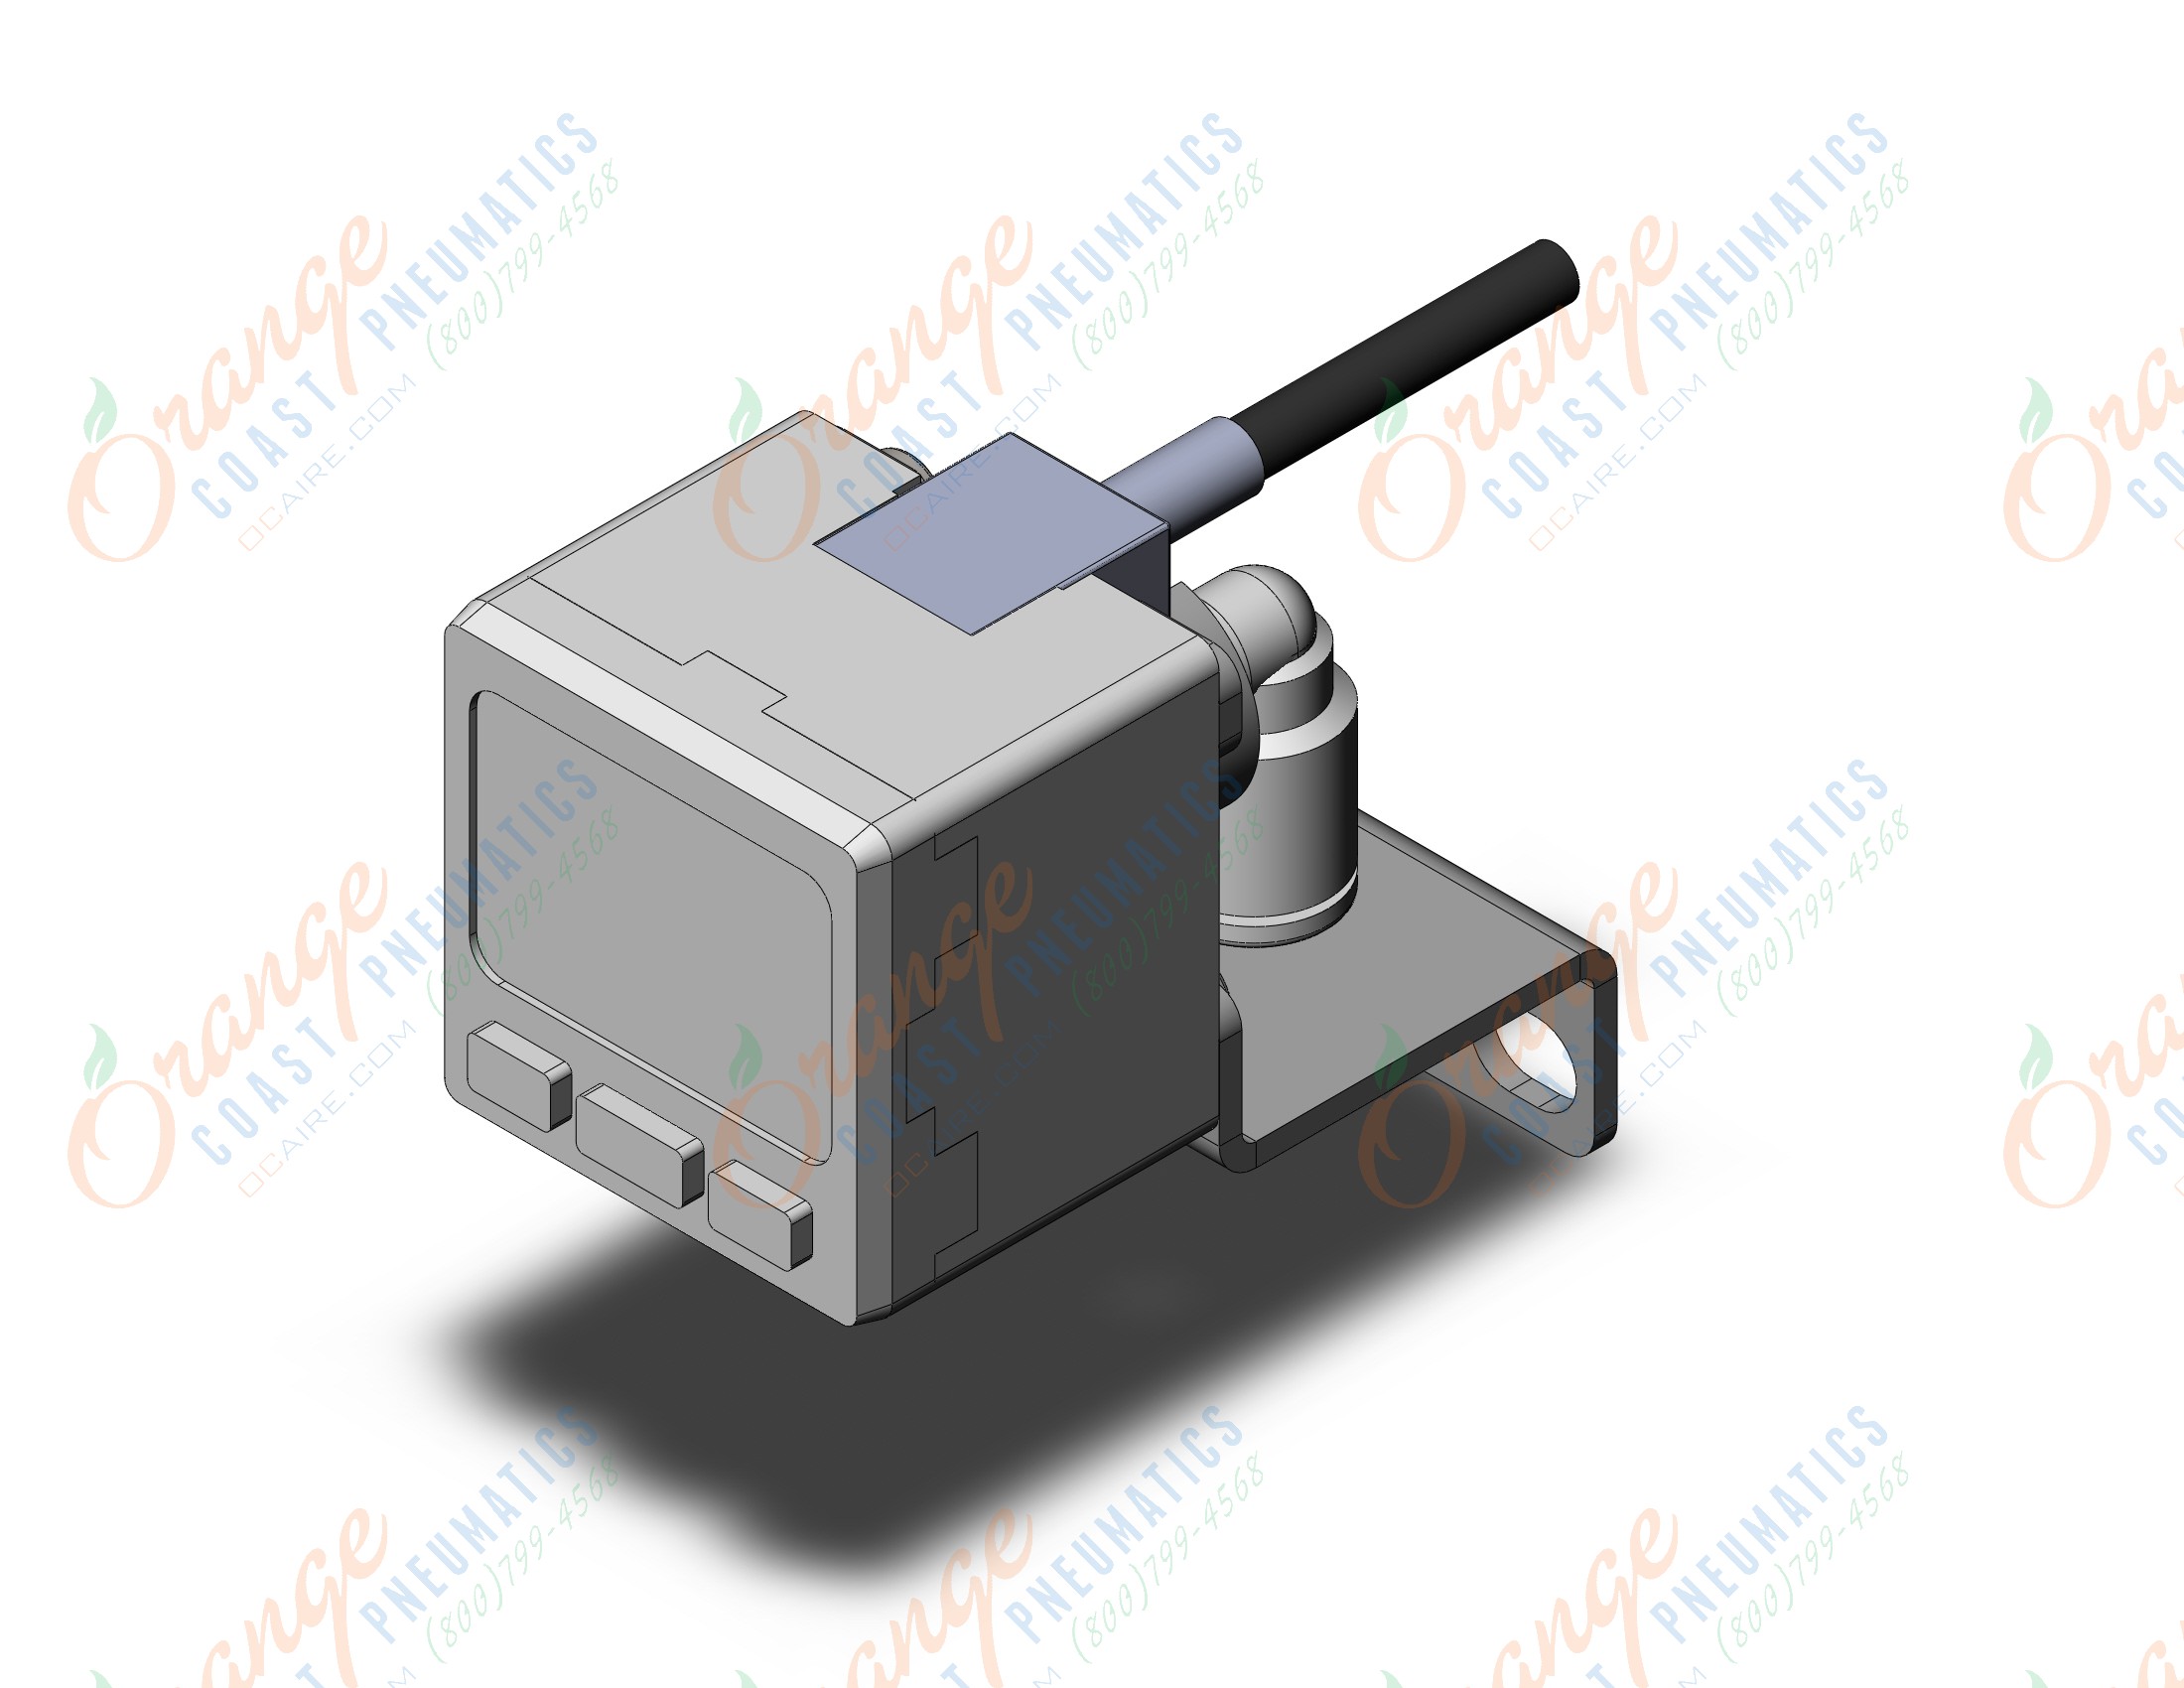 SMC ISE30A-N7L-B-GA2-X510 2 color high precision dig pres switch, PRESSURE SWITCH, ISE30, ISE30A